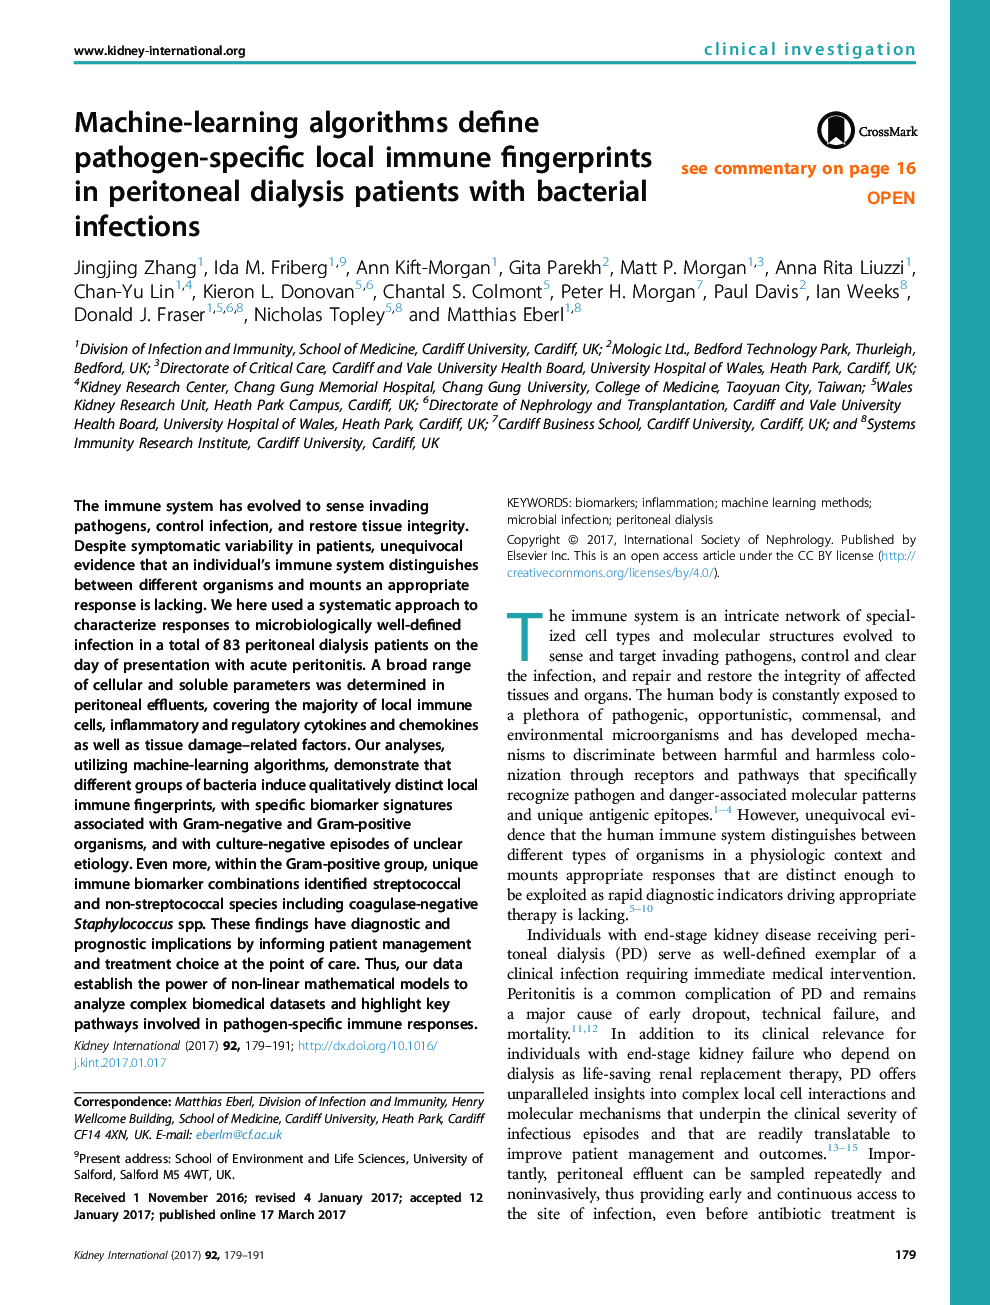 Machine-learning algorithms define pathogen-specific local immune fingerprints inÂ peritoneal dialysis patients with bacterial infections